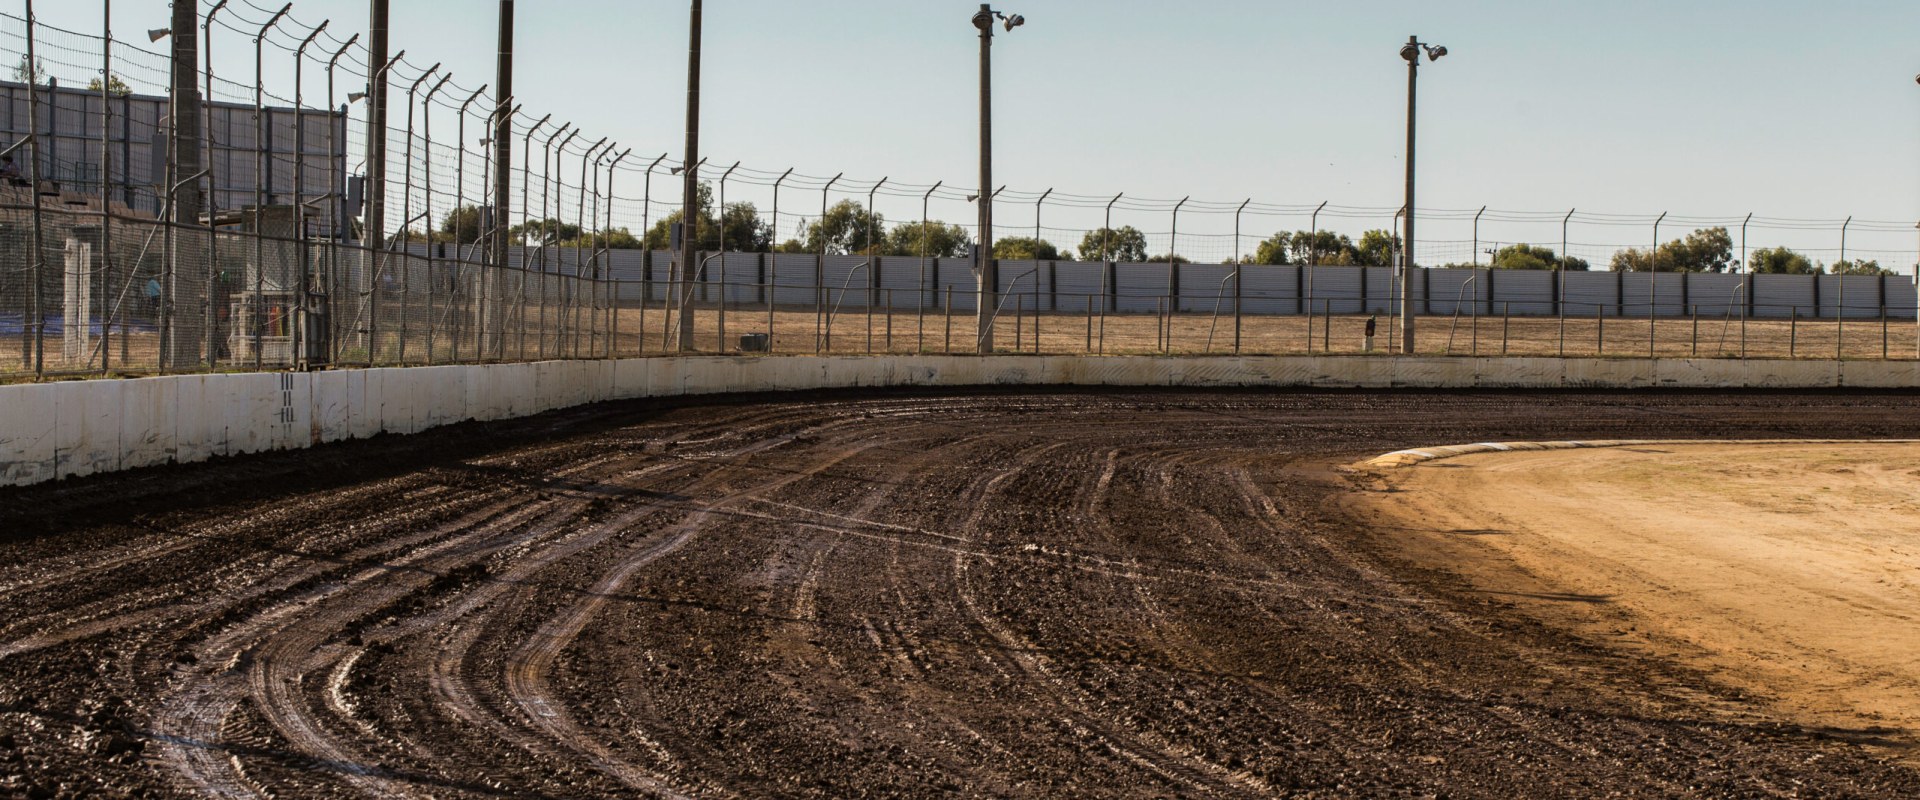 Dirt Track Racing: All You Need To Know